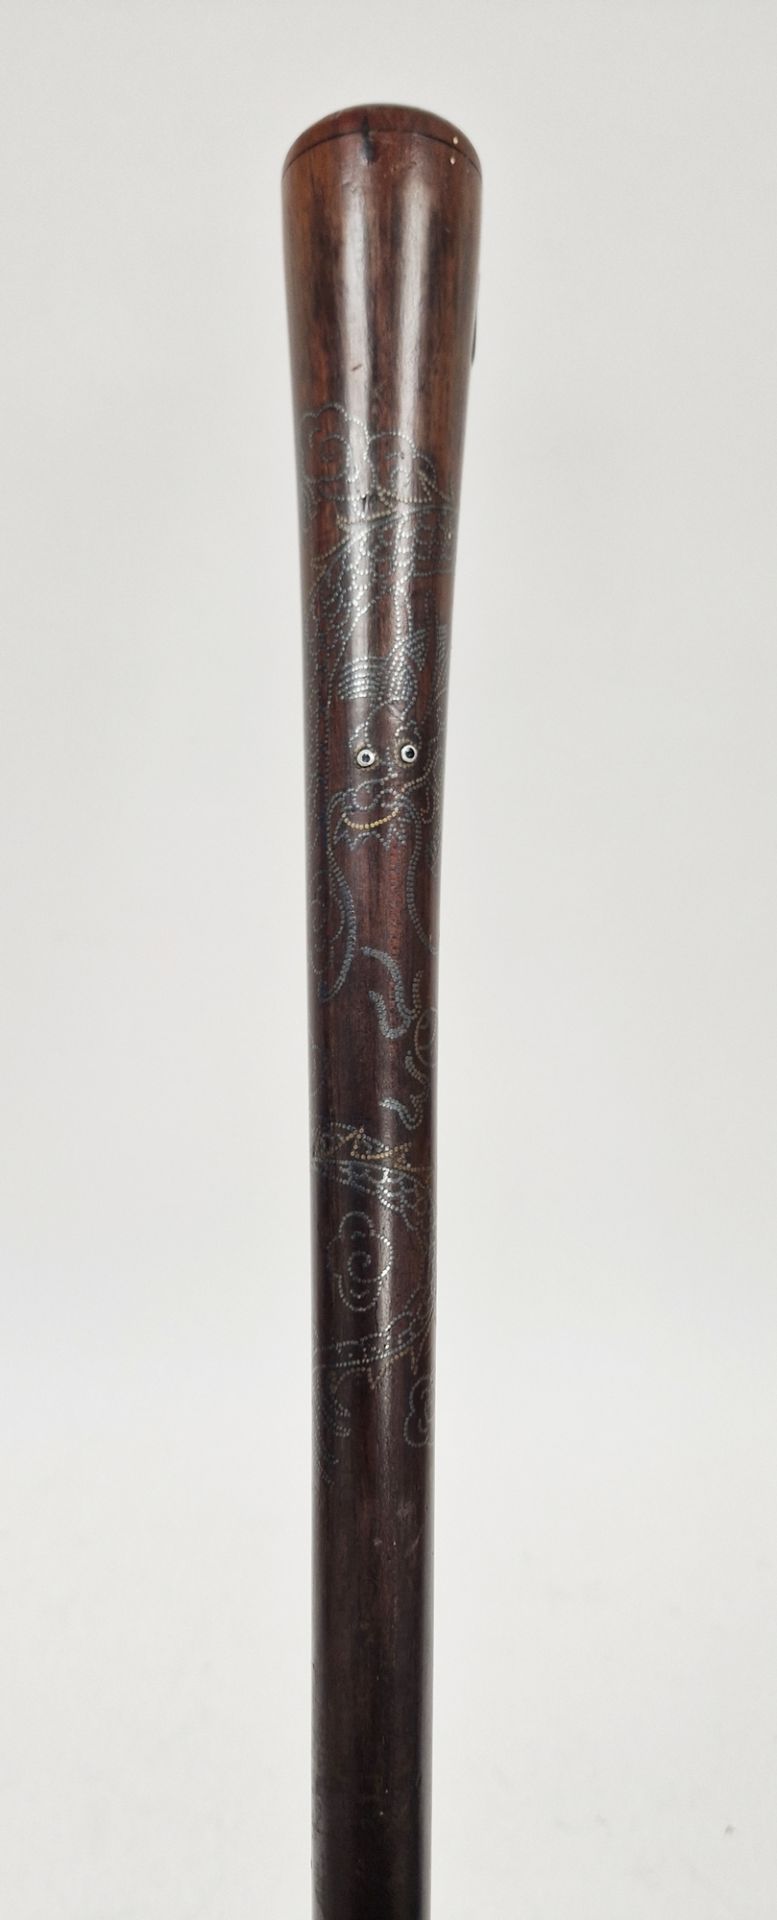 Chinese hardwood metal inlaid walking cane, early 20th century, inset with a dragon chasing - Image 2 of 2